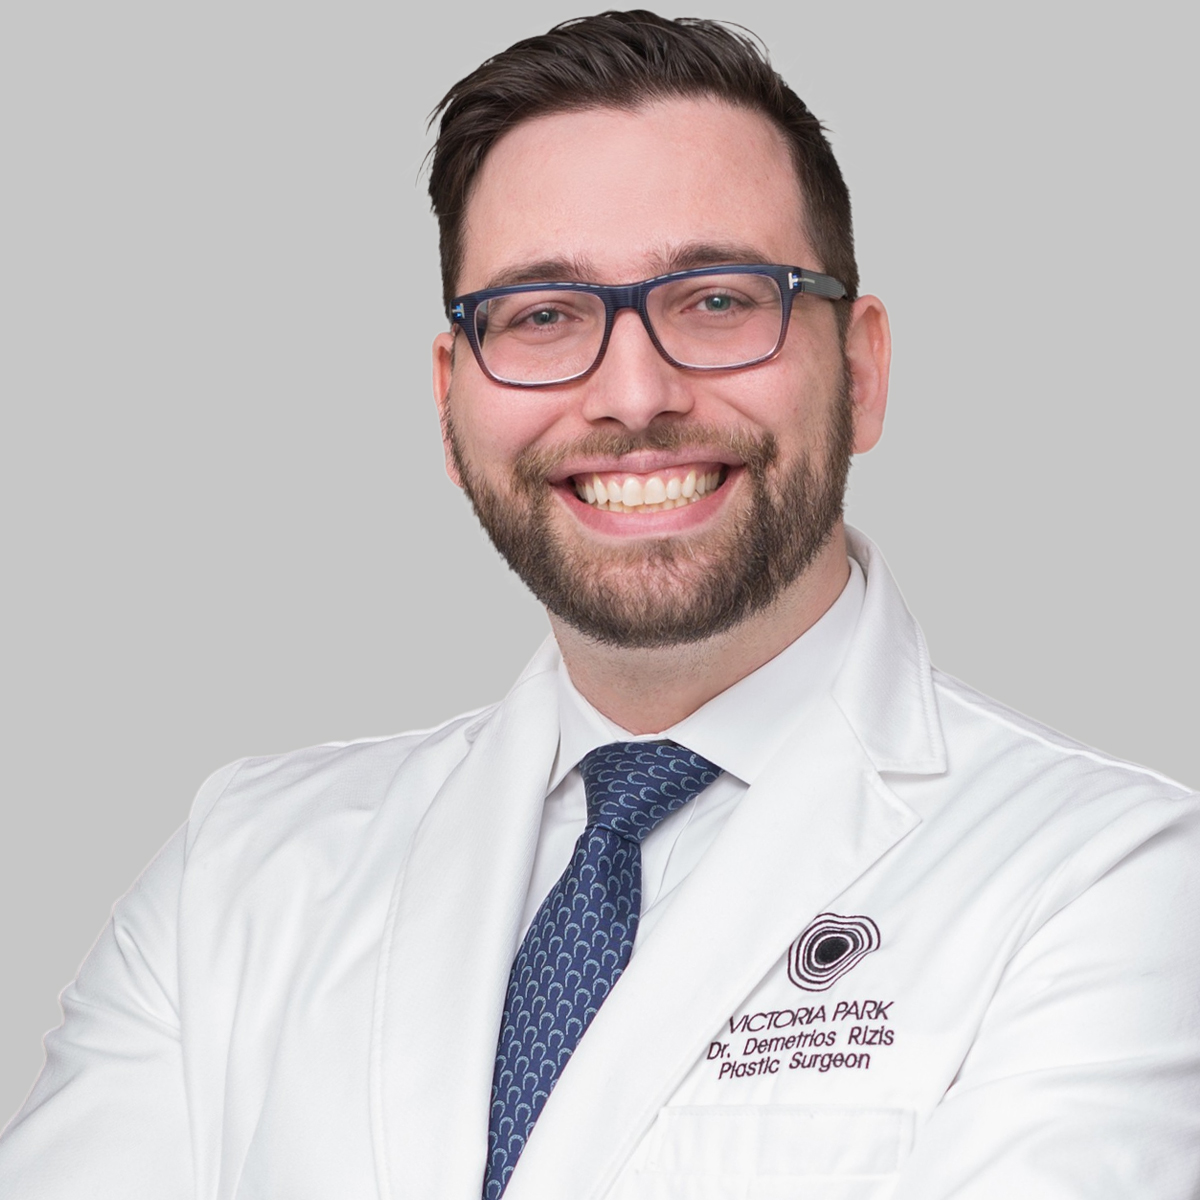 DR. DEMETRIOS RIZIS
PLASTIC SURGEON IN LONGUEUIL AND WEST ISLAND